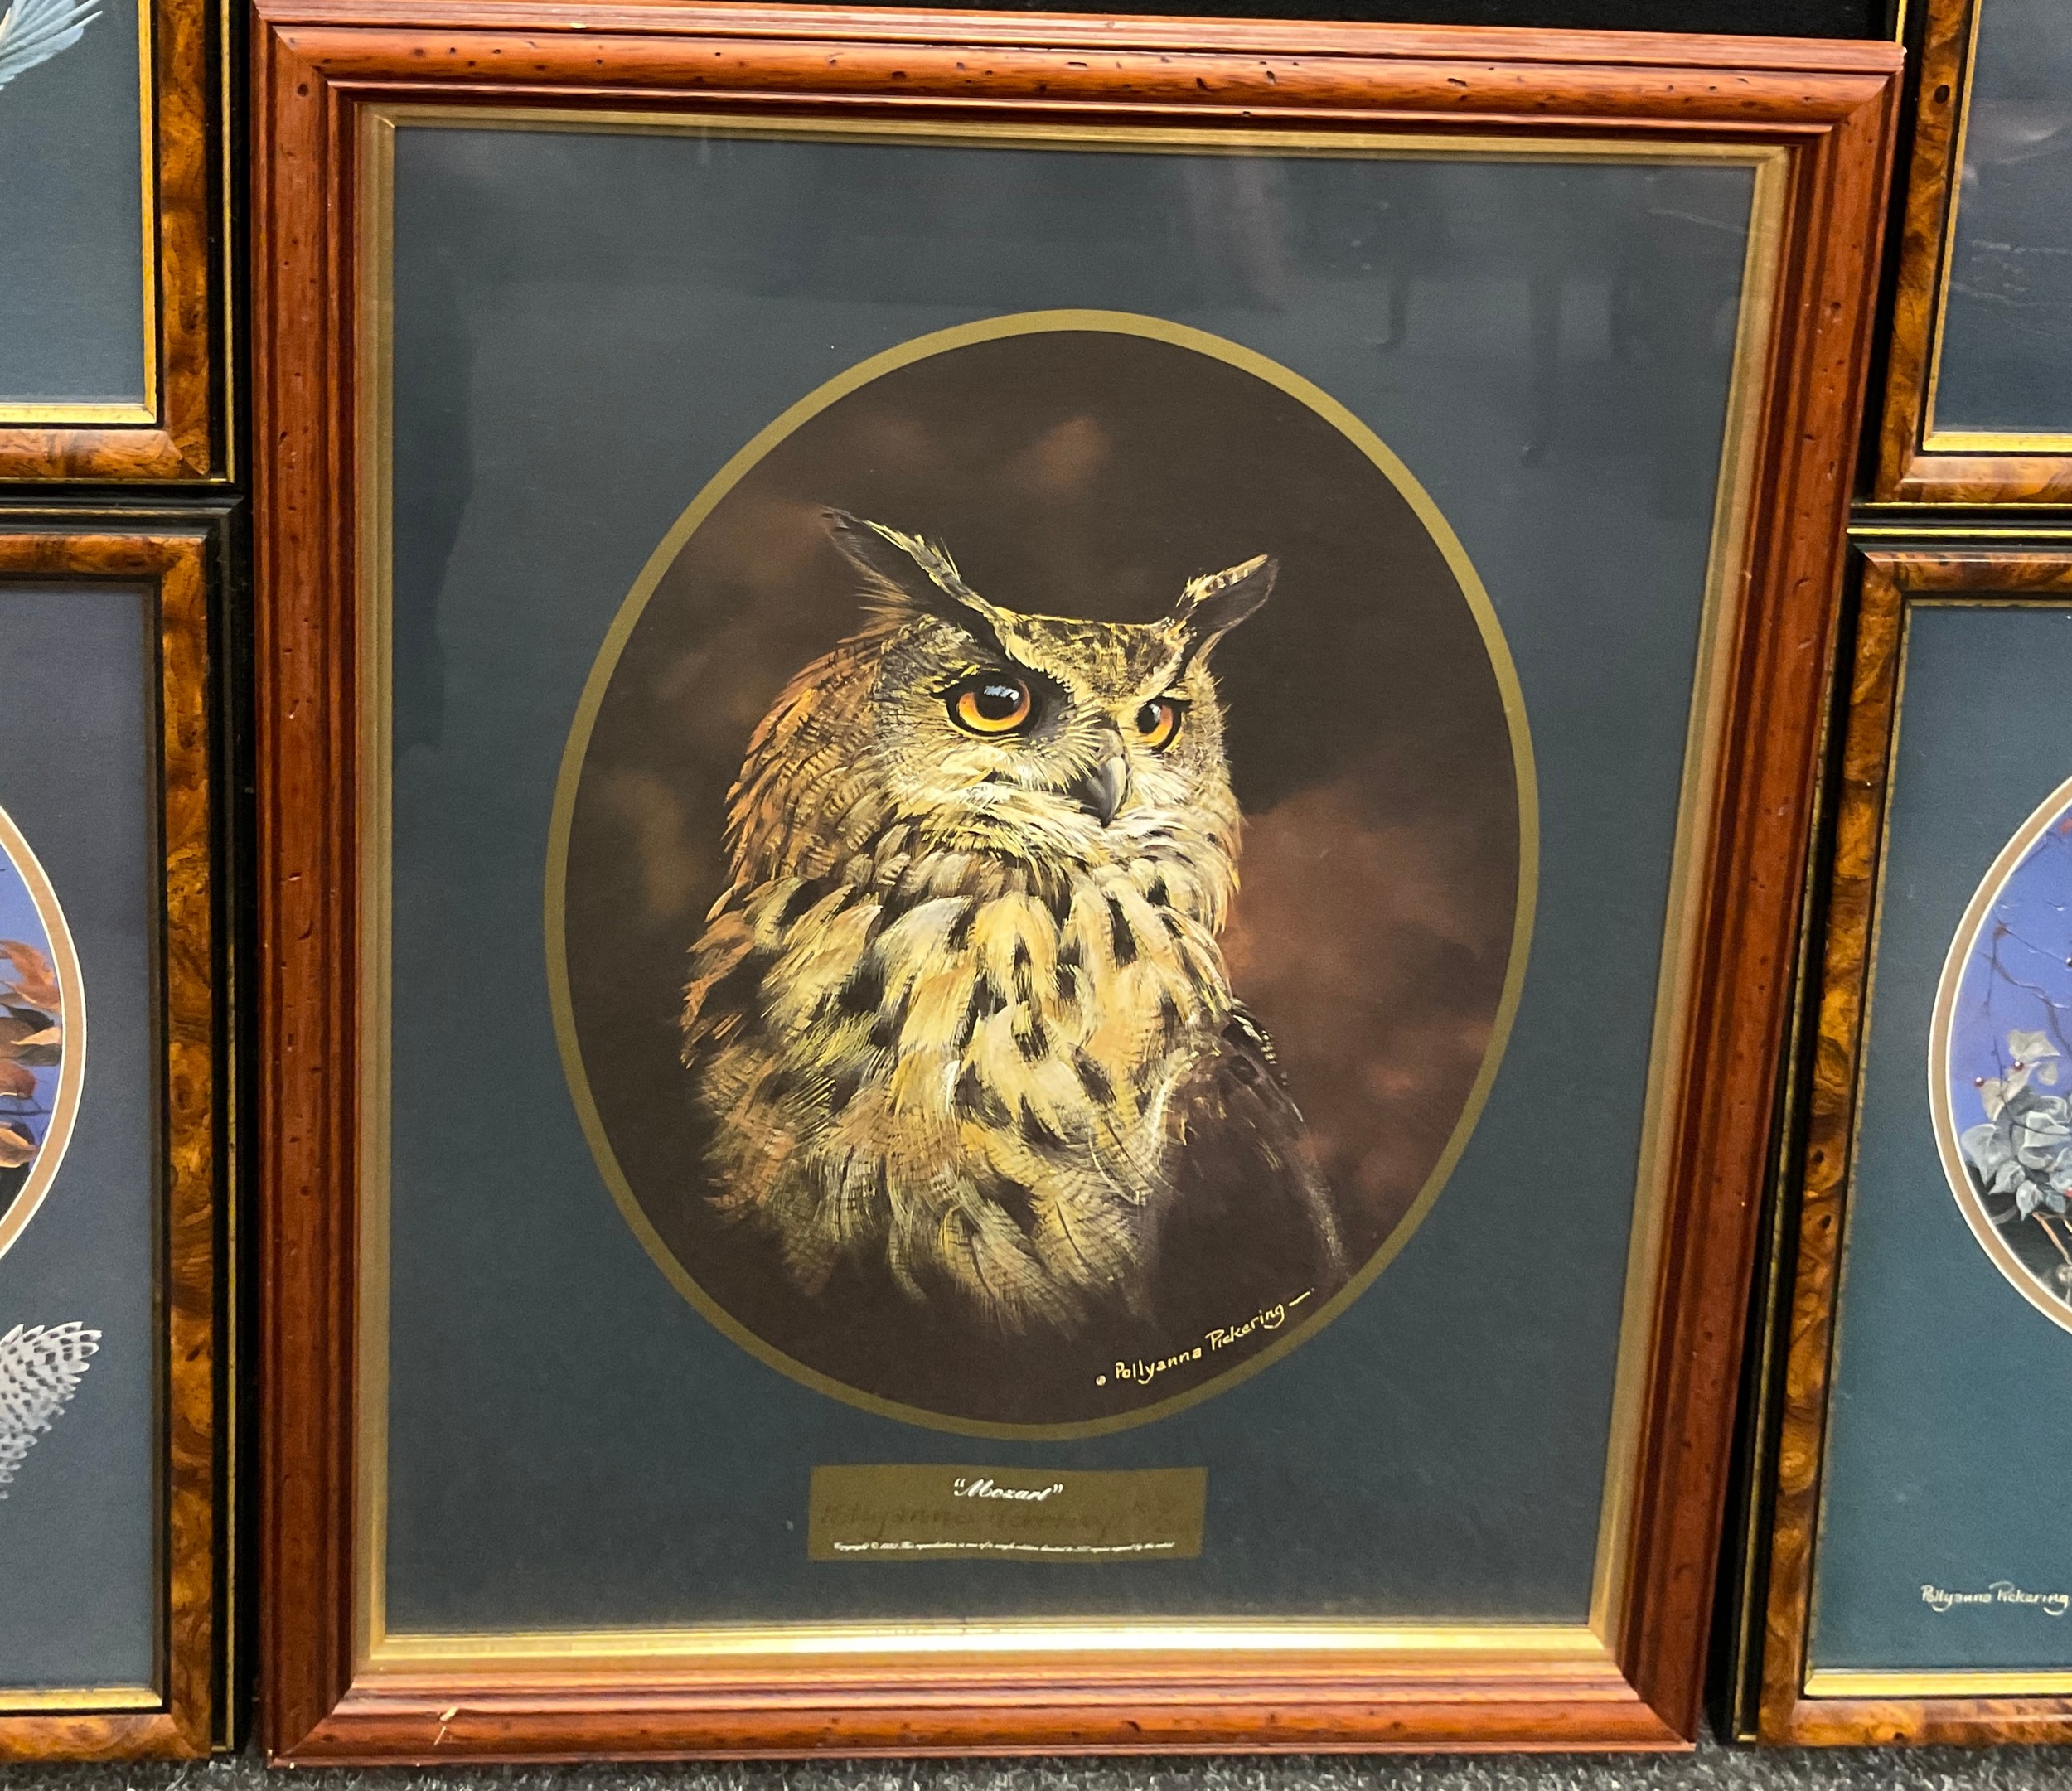 Pollyanna Pickering (1942-2018), by and after, ‘Mozart’ Eagle Owl, signed, limited edition number - Image 2 of 2